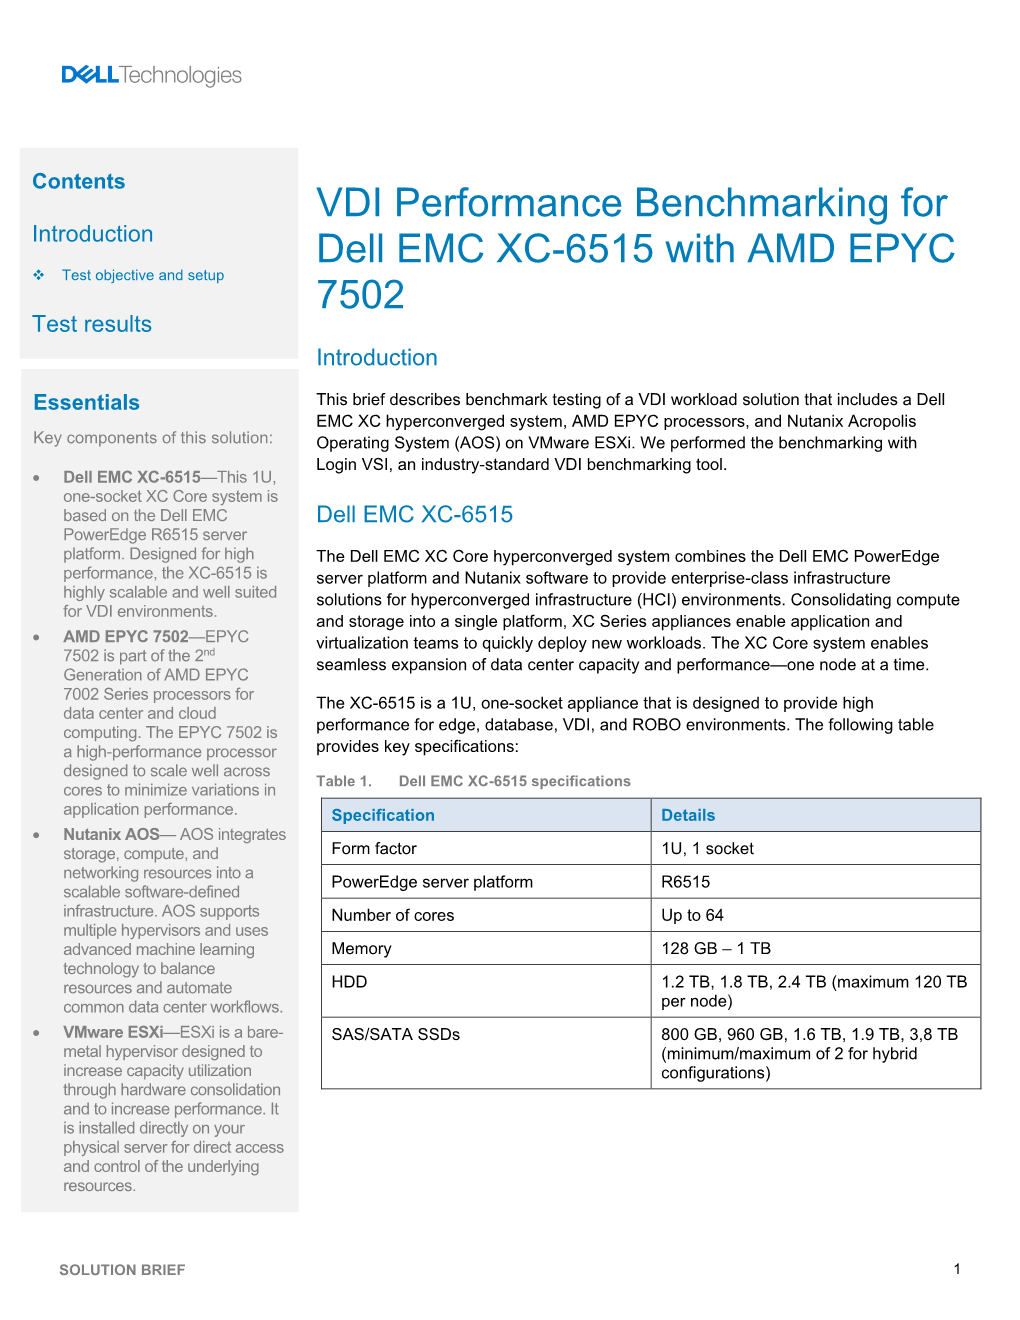 VDI Performance Benchmarking for Dell EMC XC-6515 with AMD